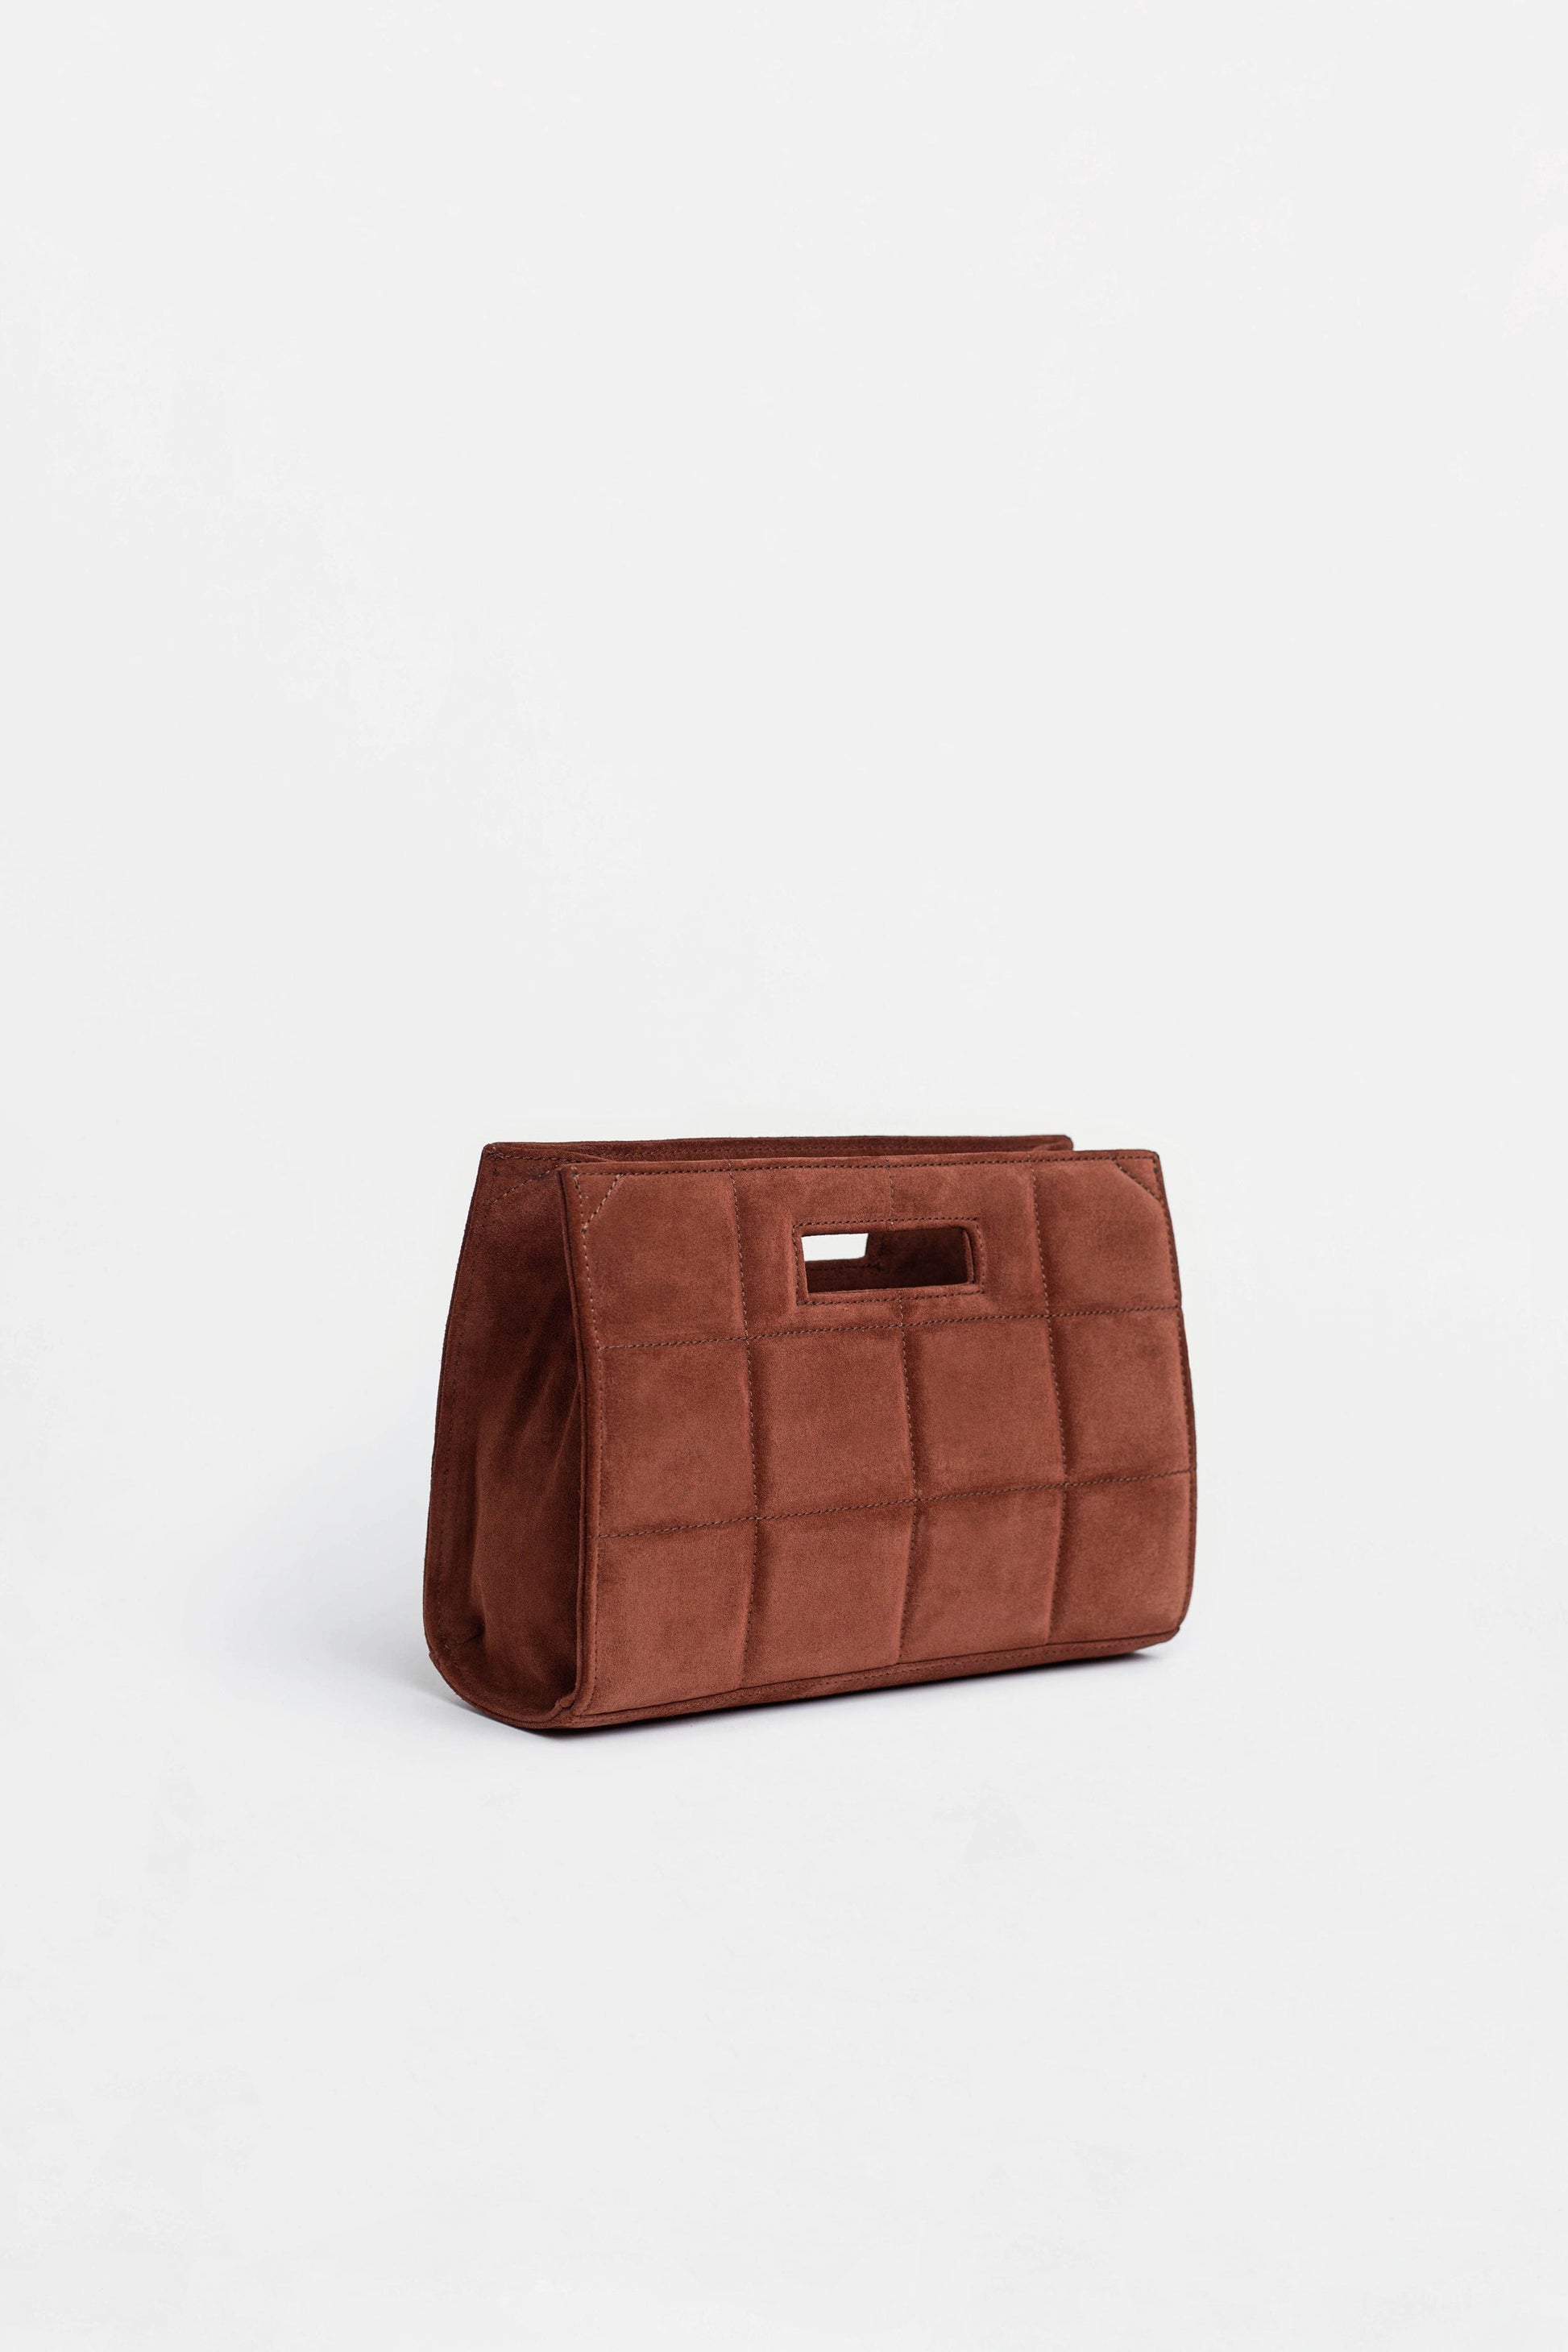 The QUILTED BAG SMALL Redbrown - JULIA SKERGETH